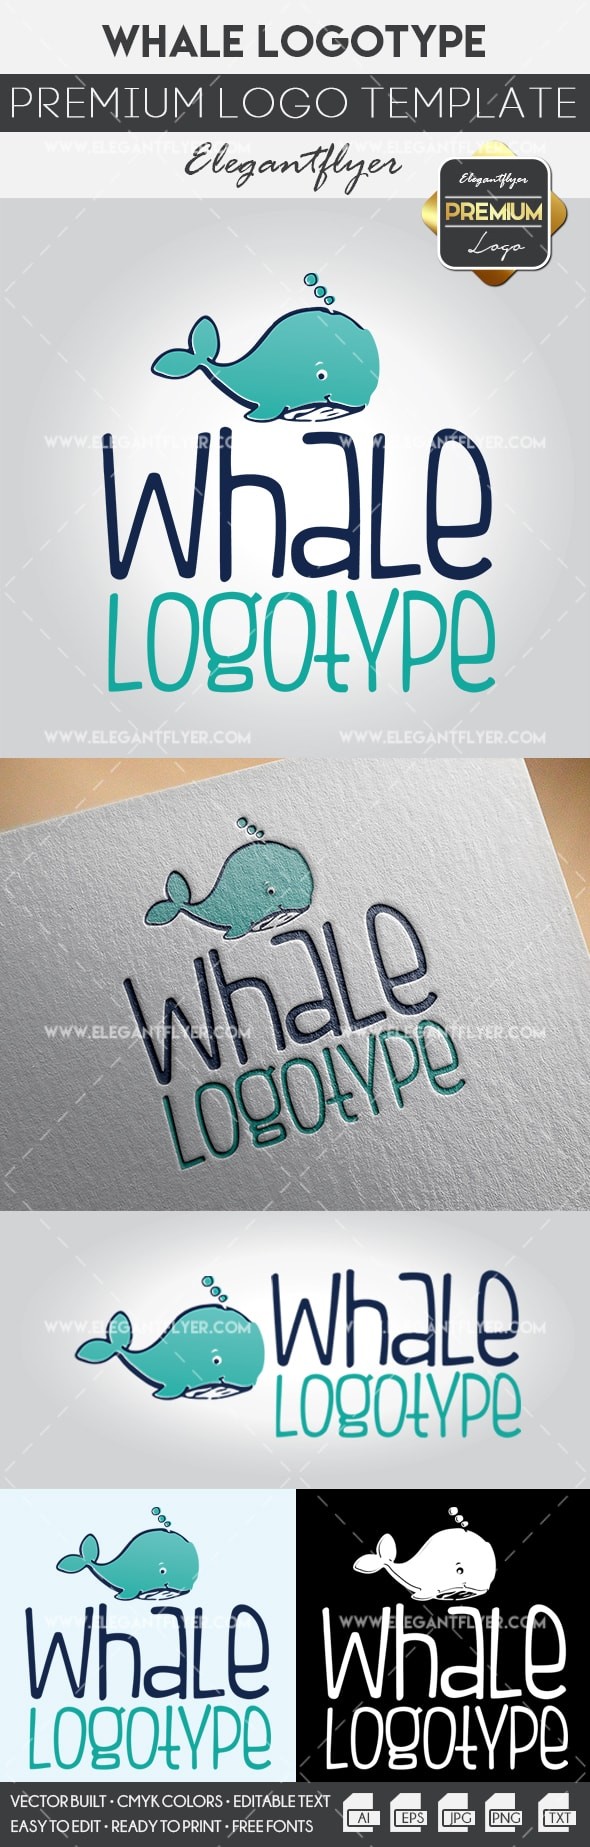 Wal   
(Note: "Wal" means "whale" in German) by ElegantFlyer